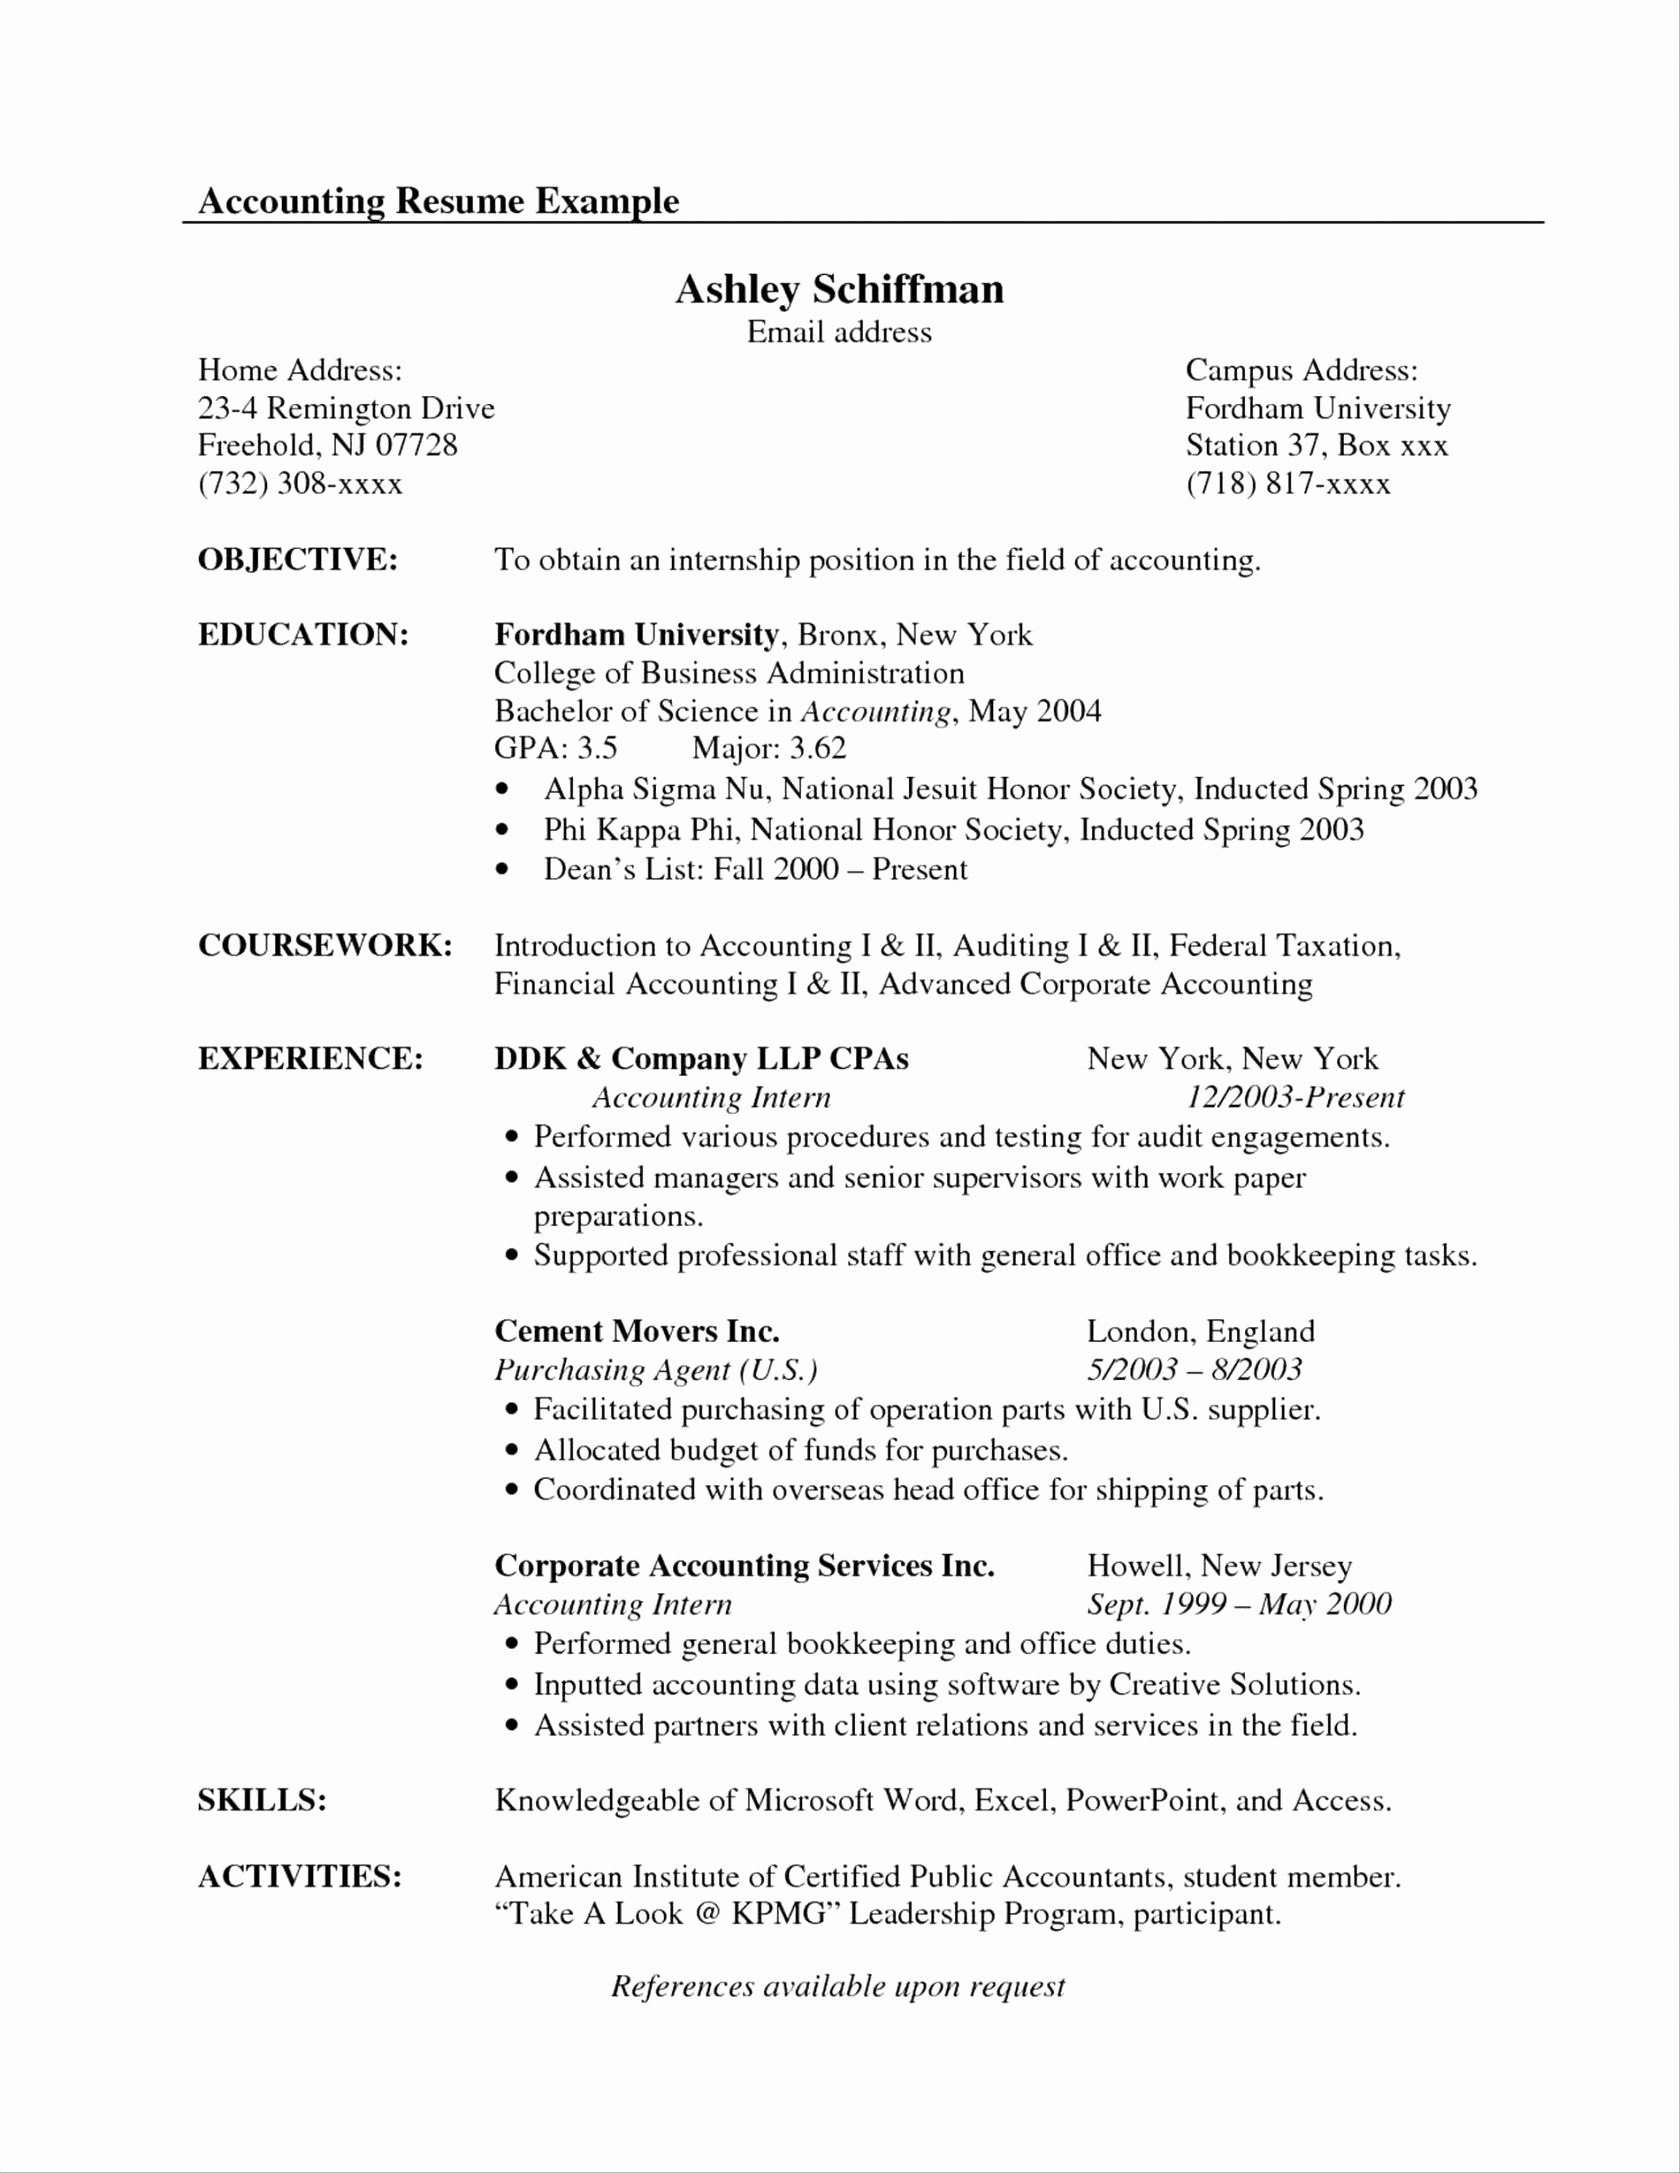 resume format for accountant lovely accounting resume sample